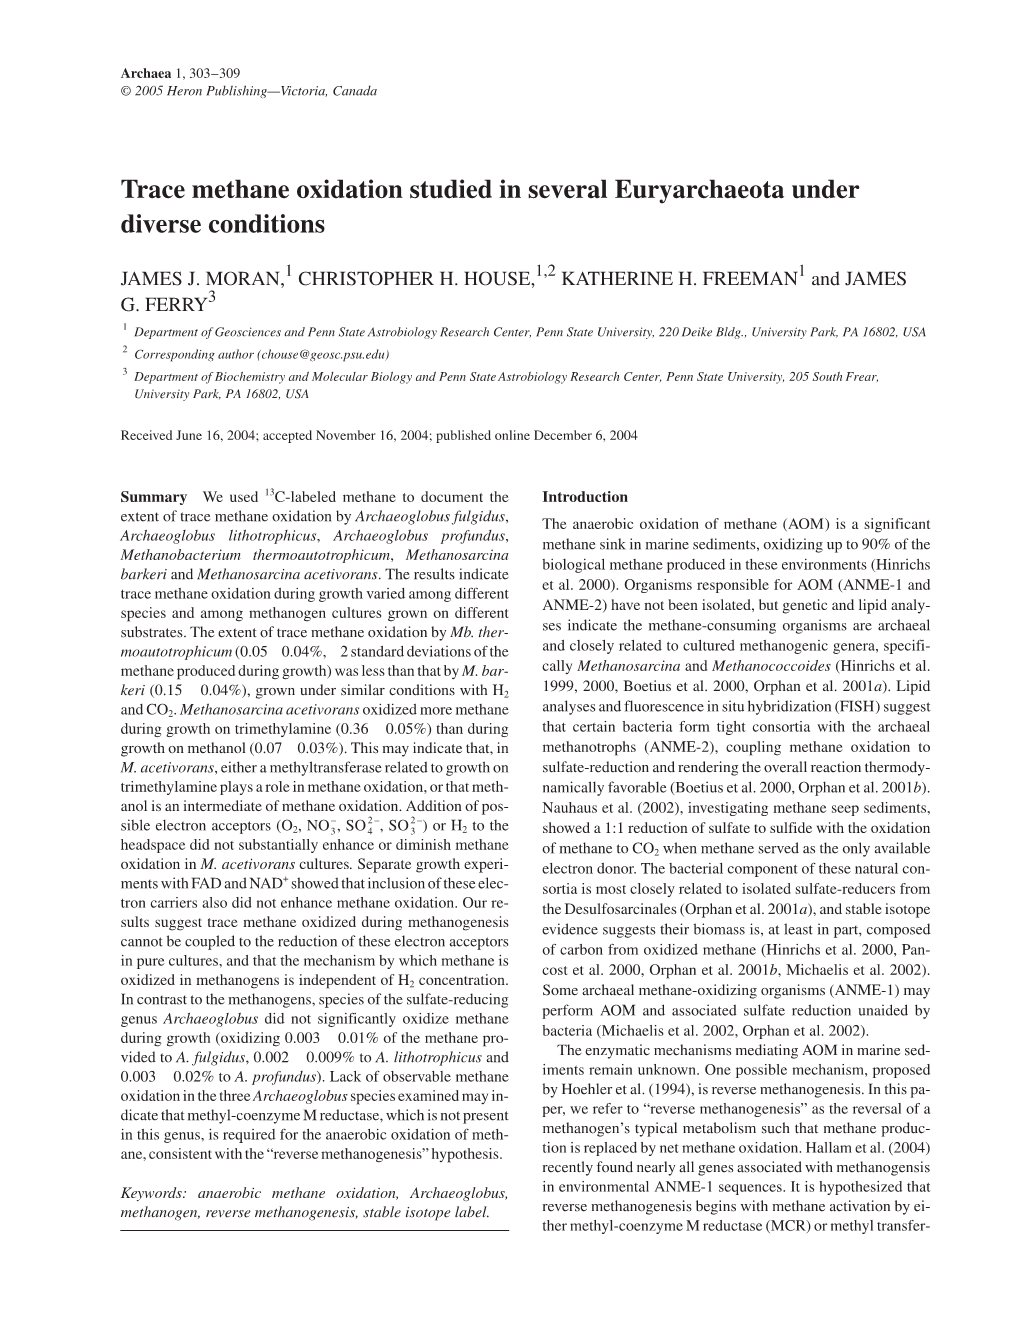 Trace Methane Oxidation Studied in Several Euryarchaeota Under Diverse Conditions